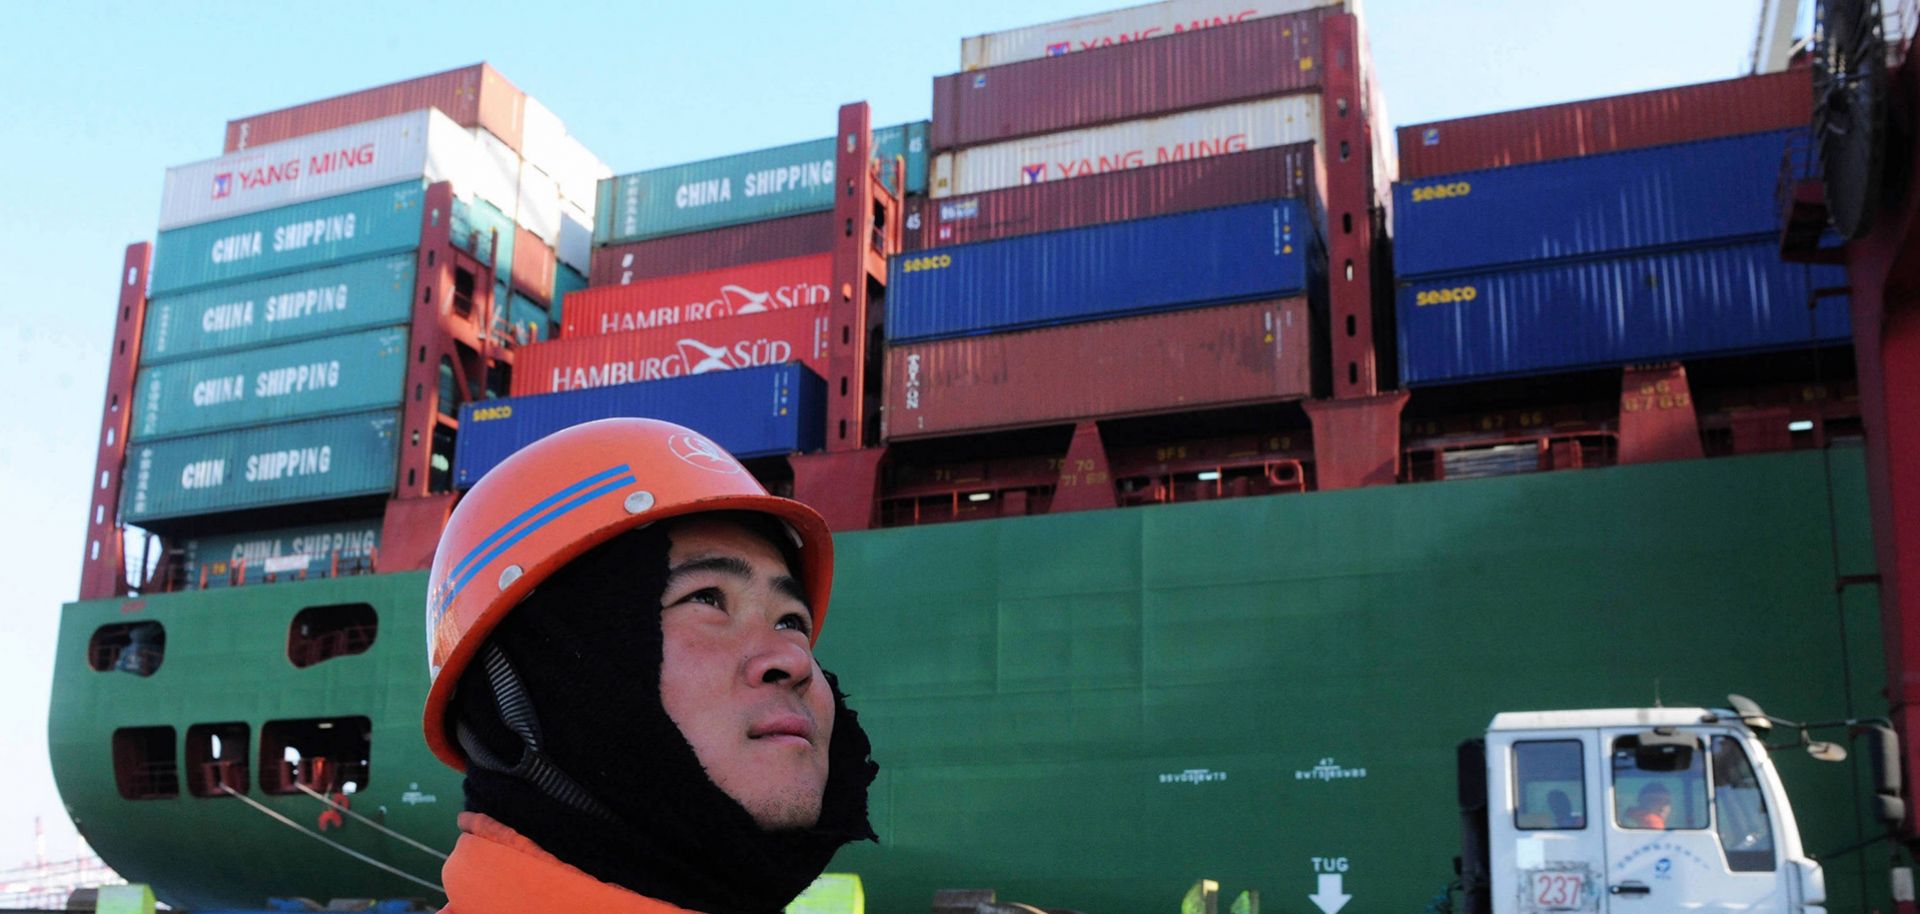 A worker watches cranes at the port in Qingdao, China, on Feb. 15.